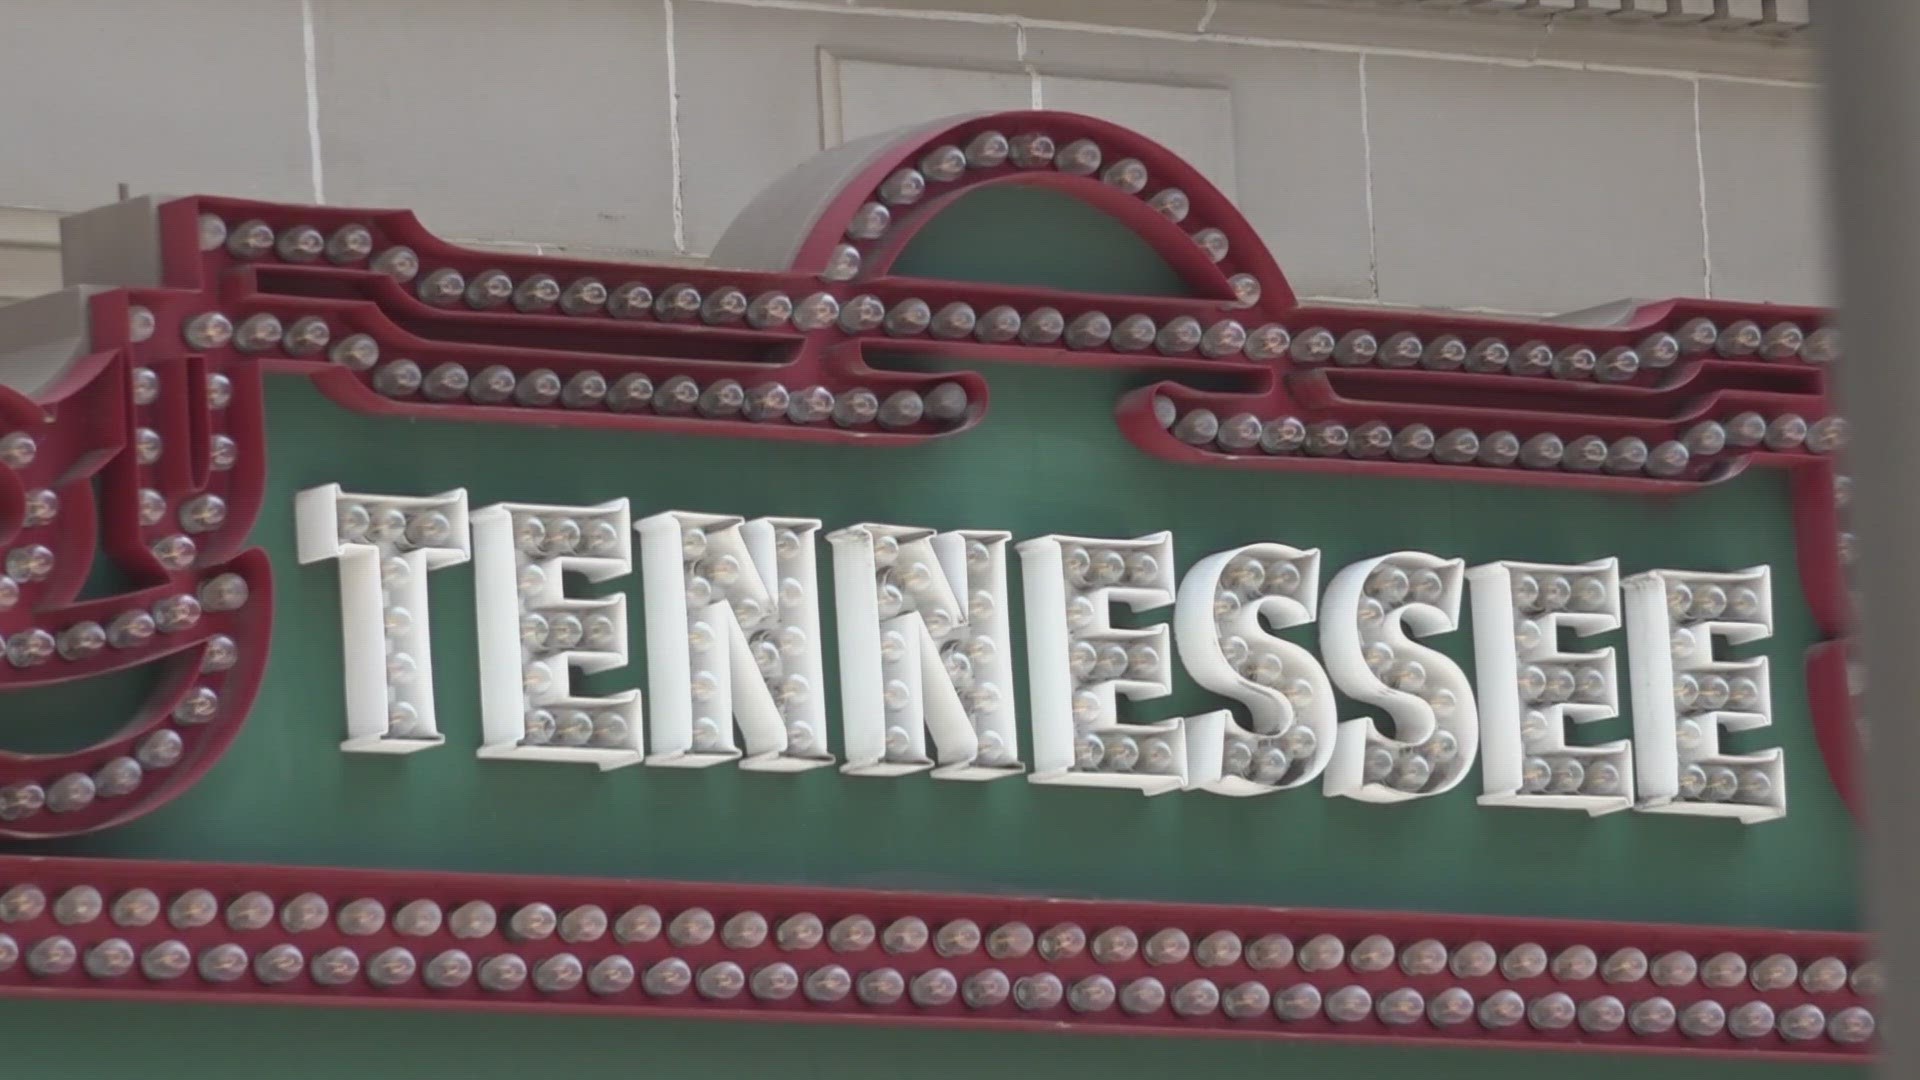 More than 15 new businesses have opened their doors in Knoxville this summer. Some locals credit tourism as the main reason for an increase in businesses.